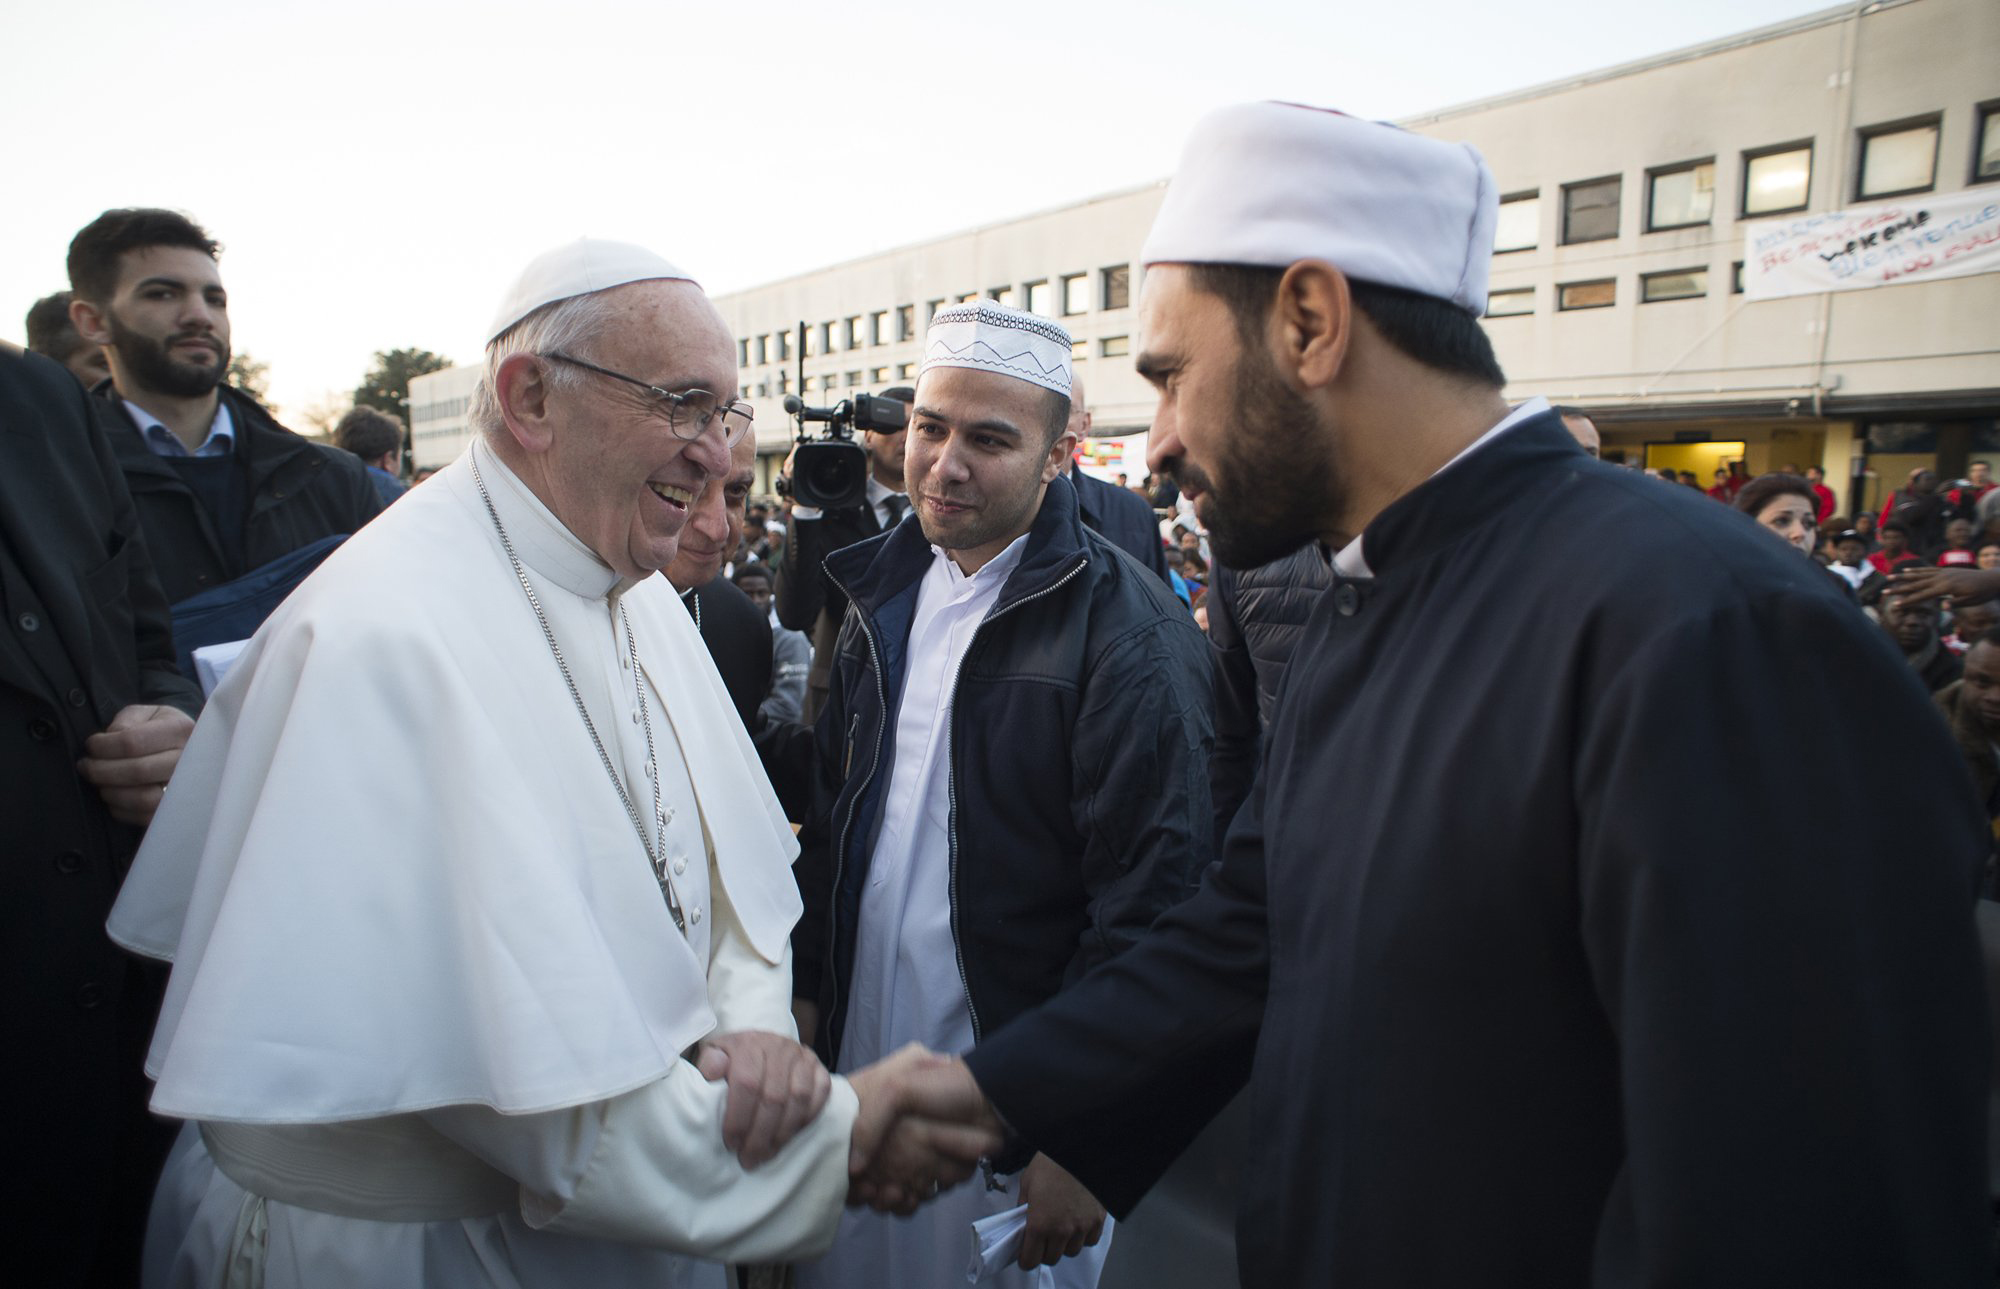 Pope Francis at the Castelnuovo di Porto refugees center near Rome, Italy on March 24, 2016.